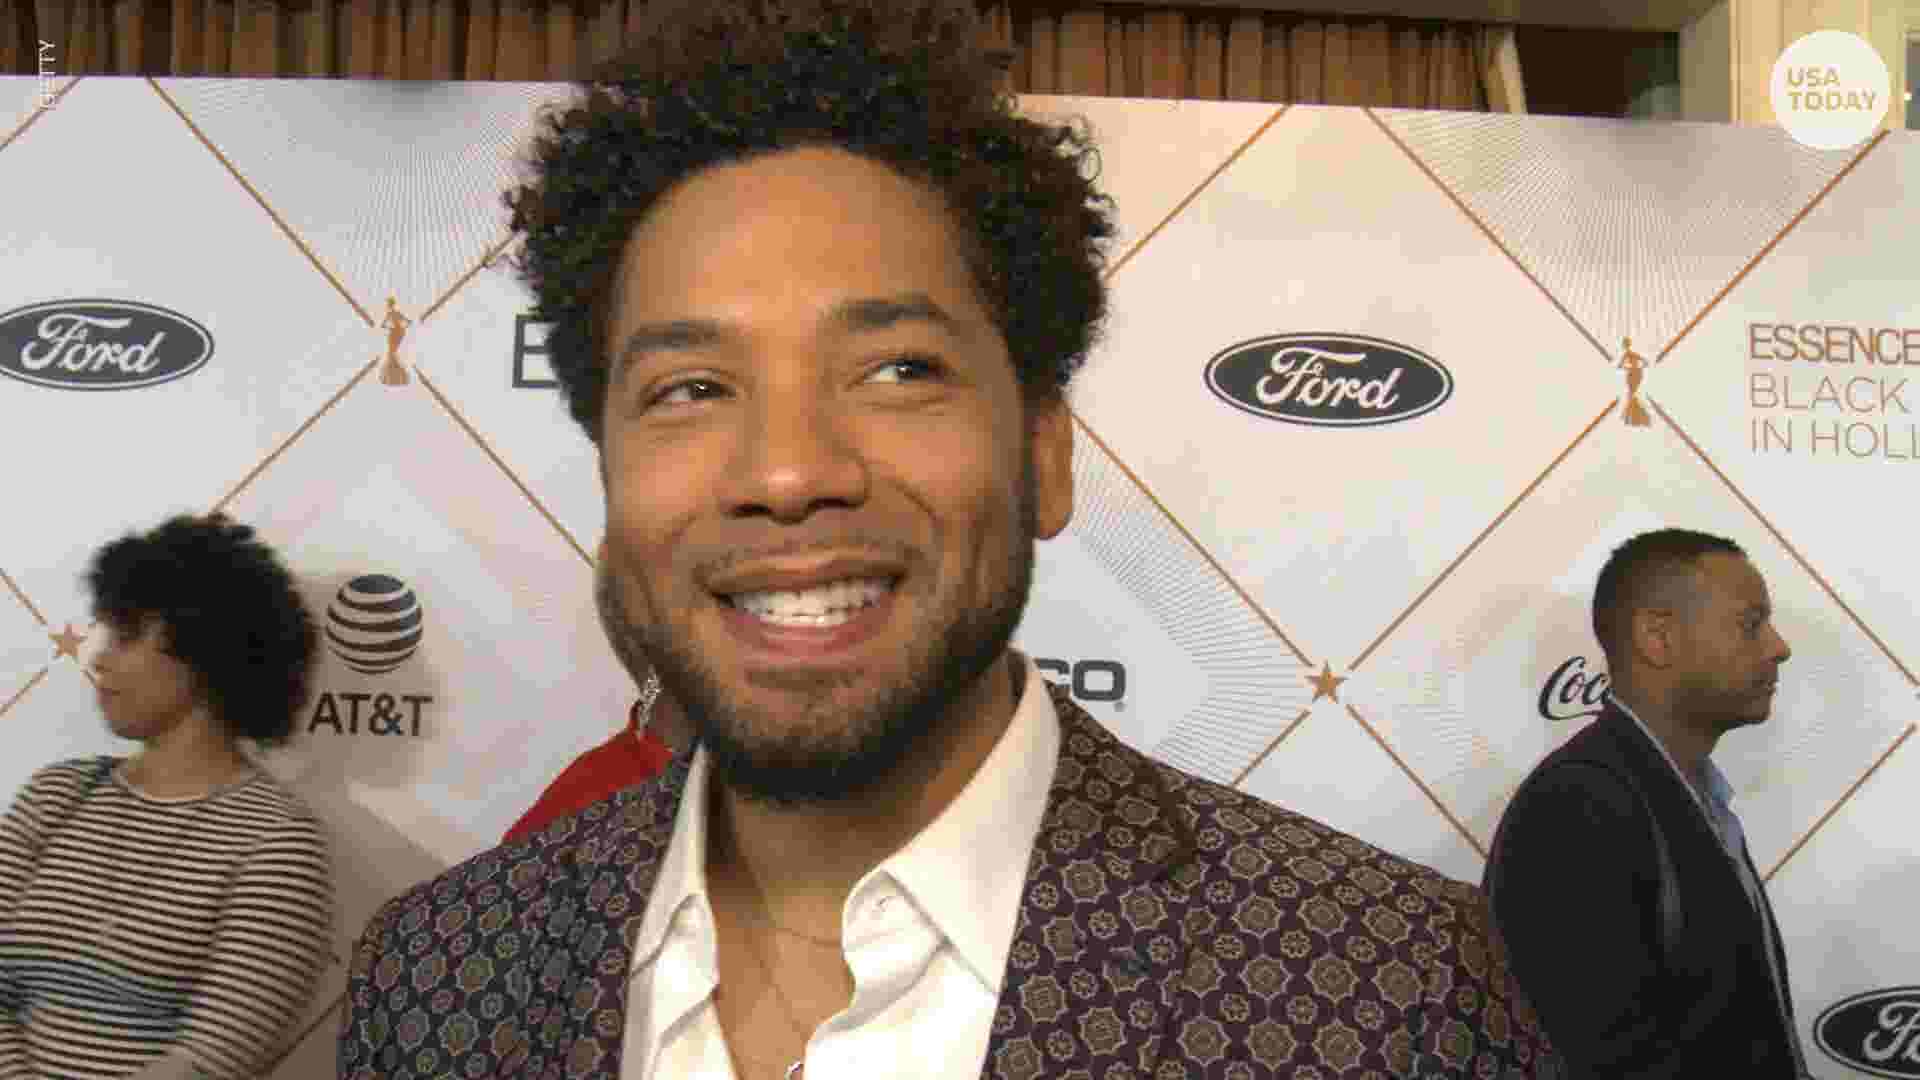 Celebrities and politicians rally behind Jussie Smollett after attack1920 x 1080